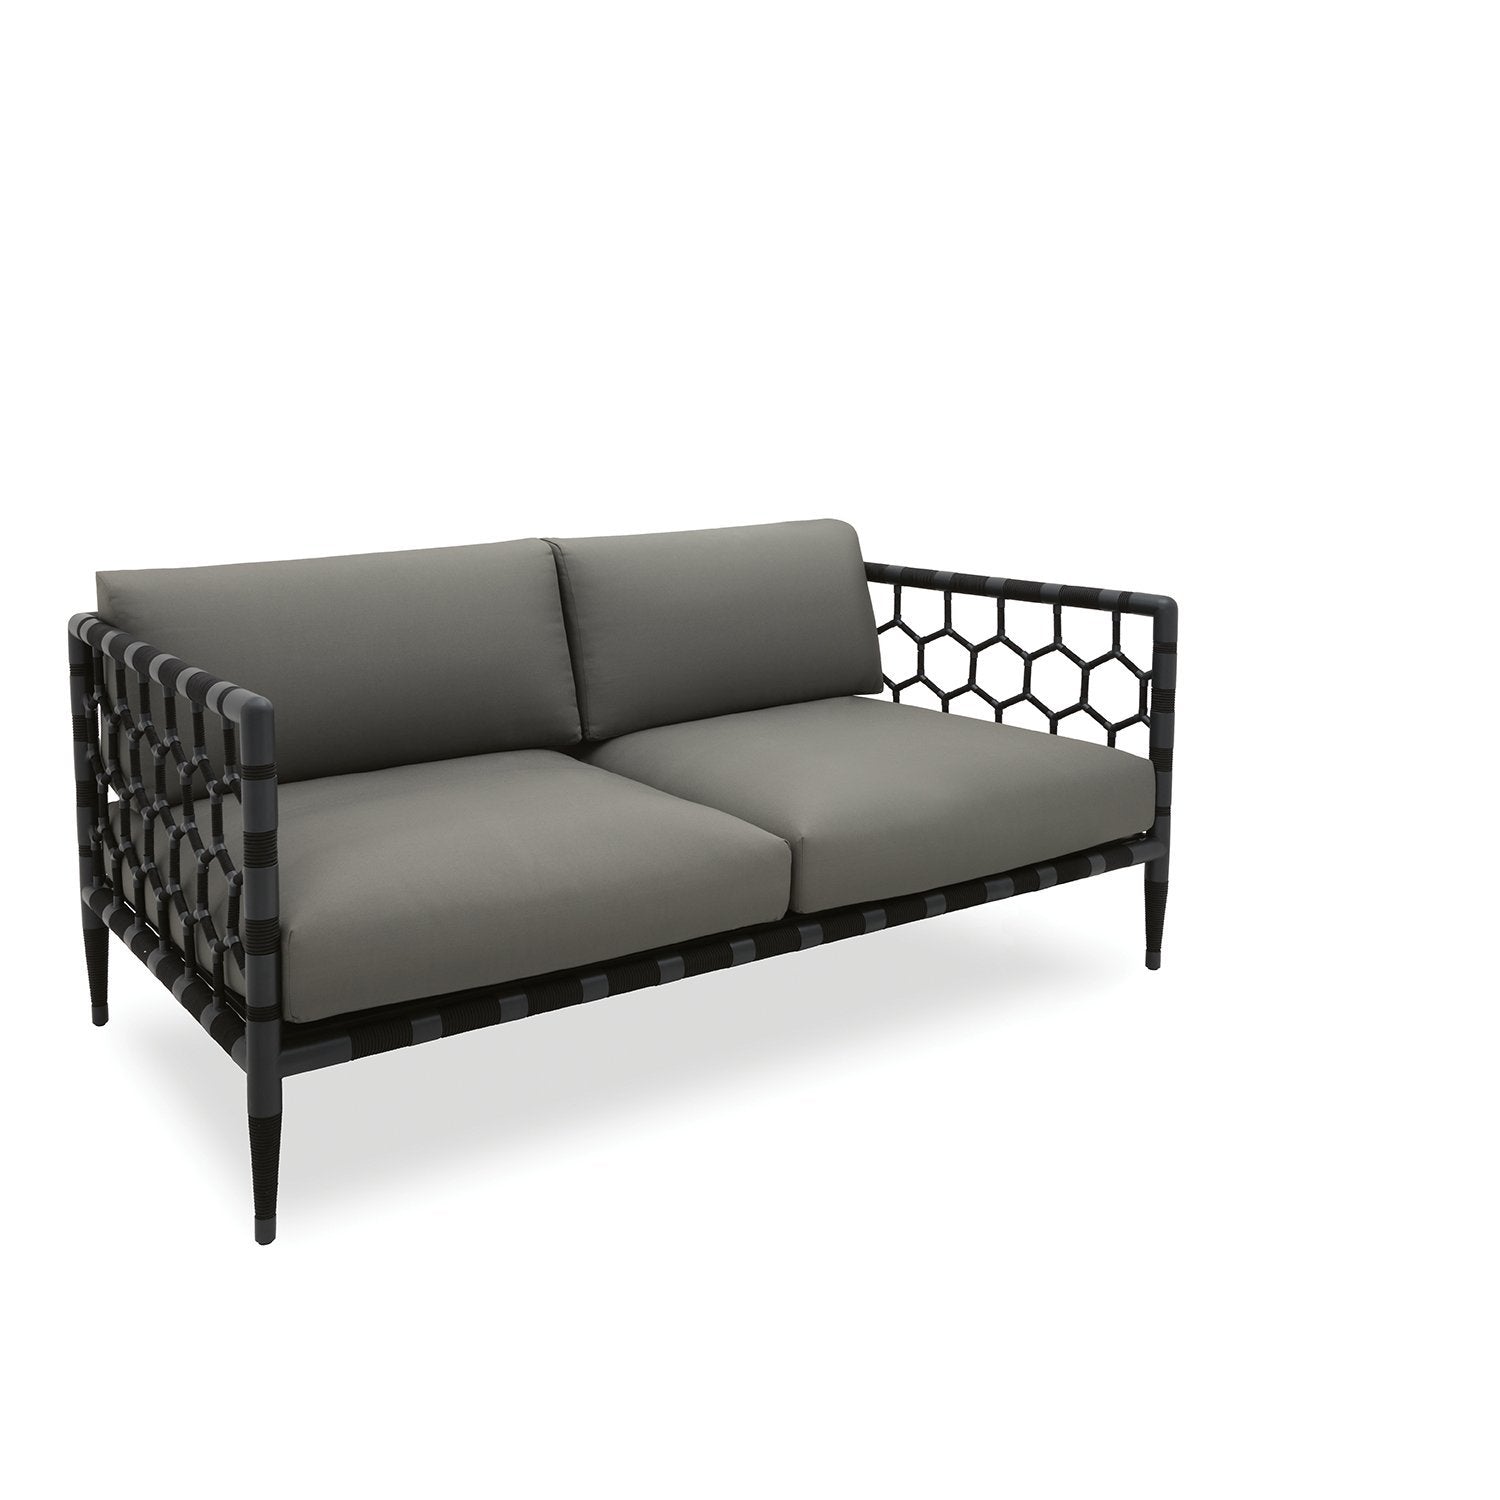 Olympia 2 Seat Sofa - Slate Fabric with Anthracite Powder Coated Frame